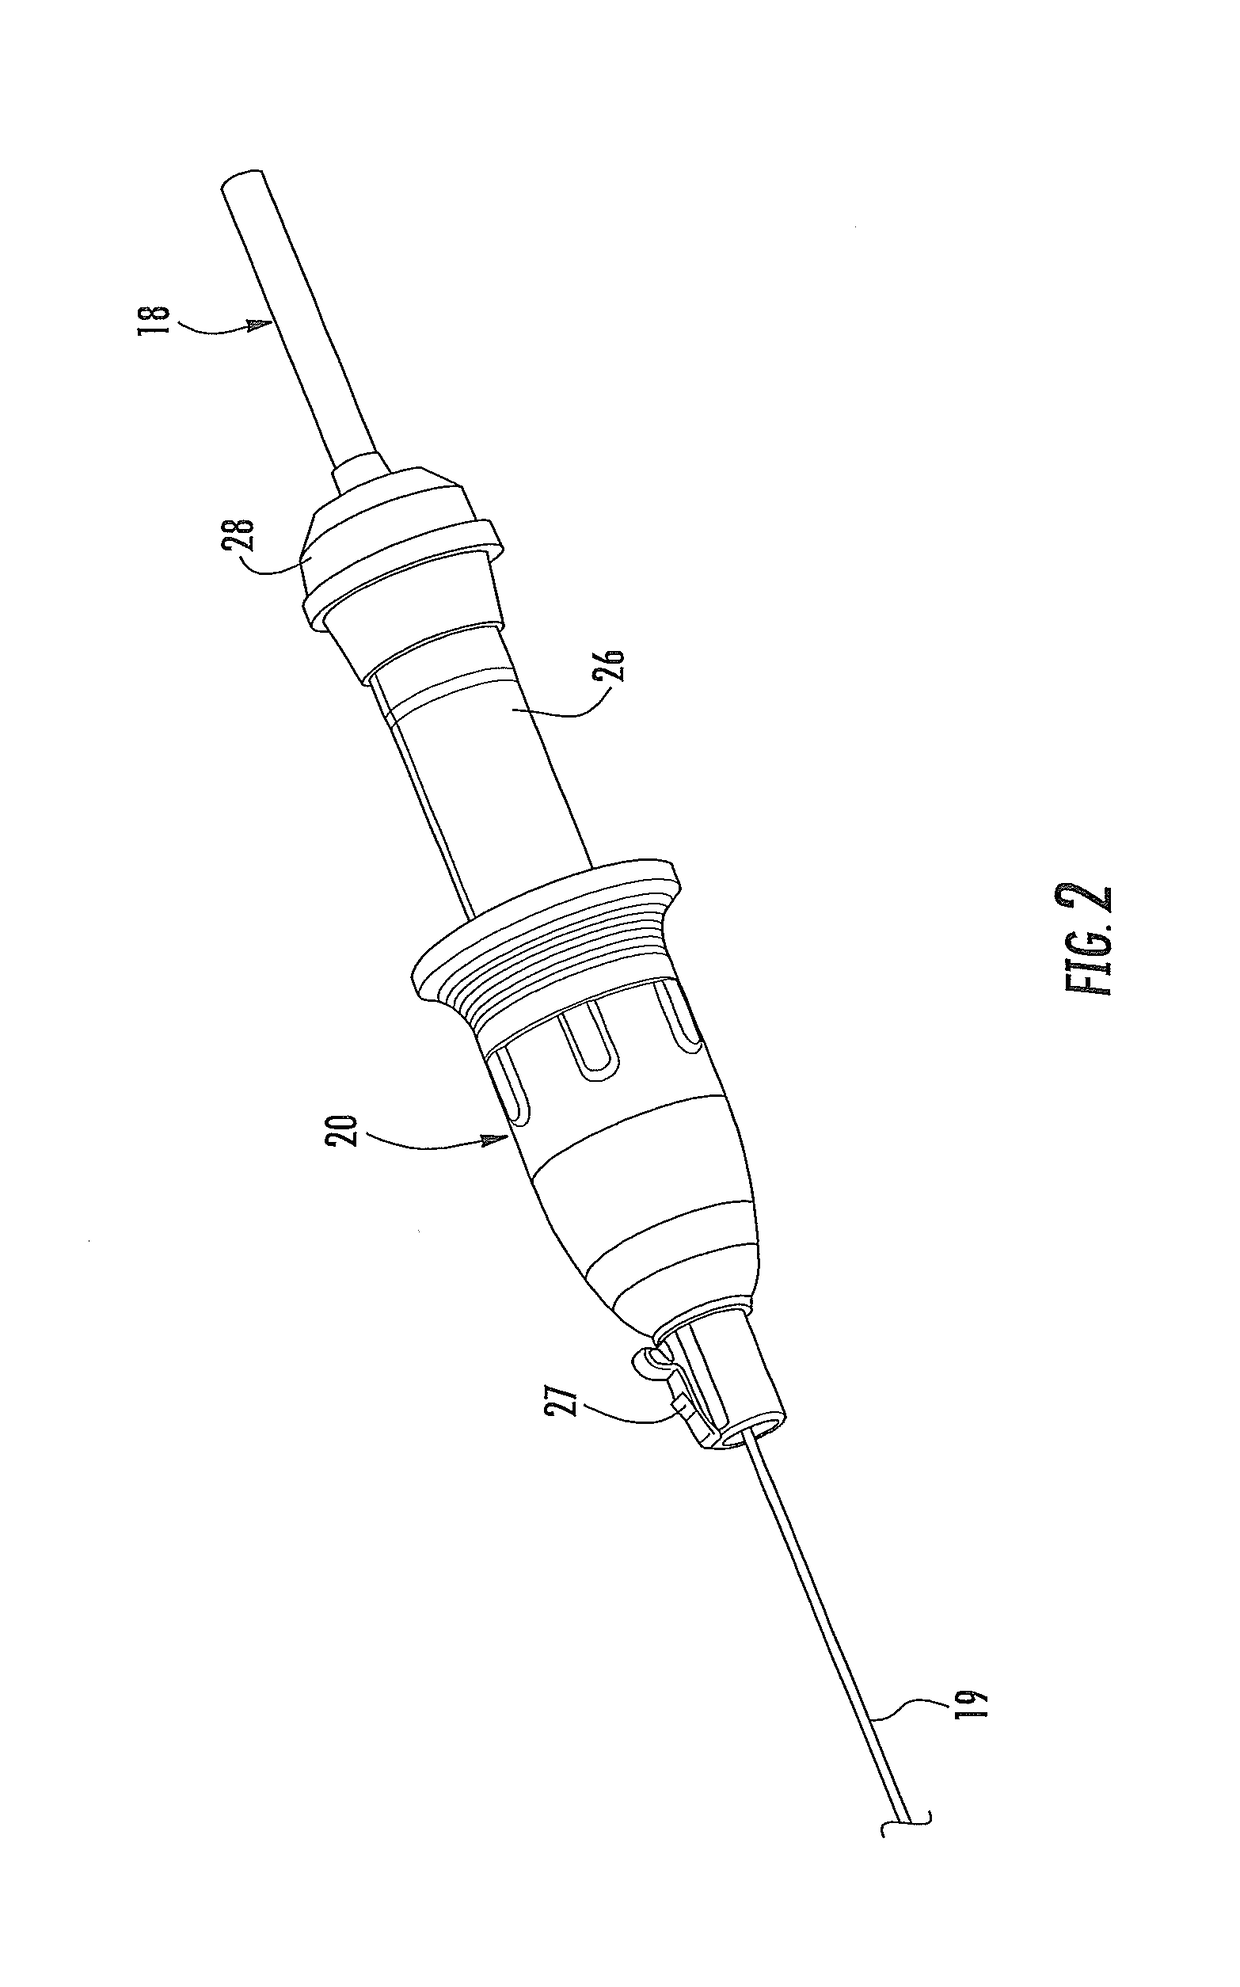 Microwave ablation catheter, handle, and system